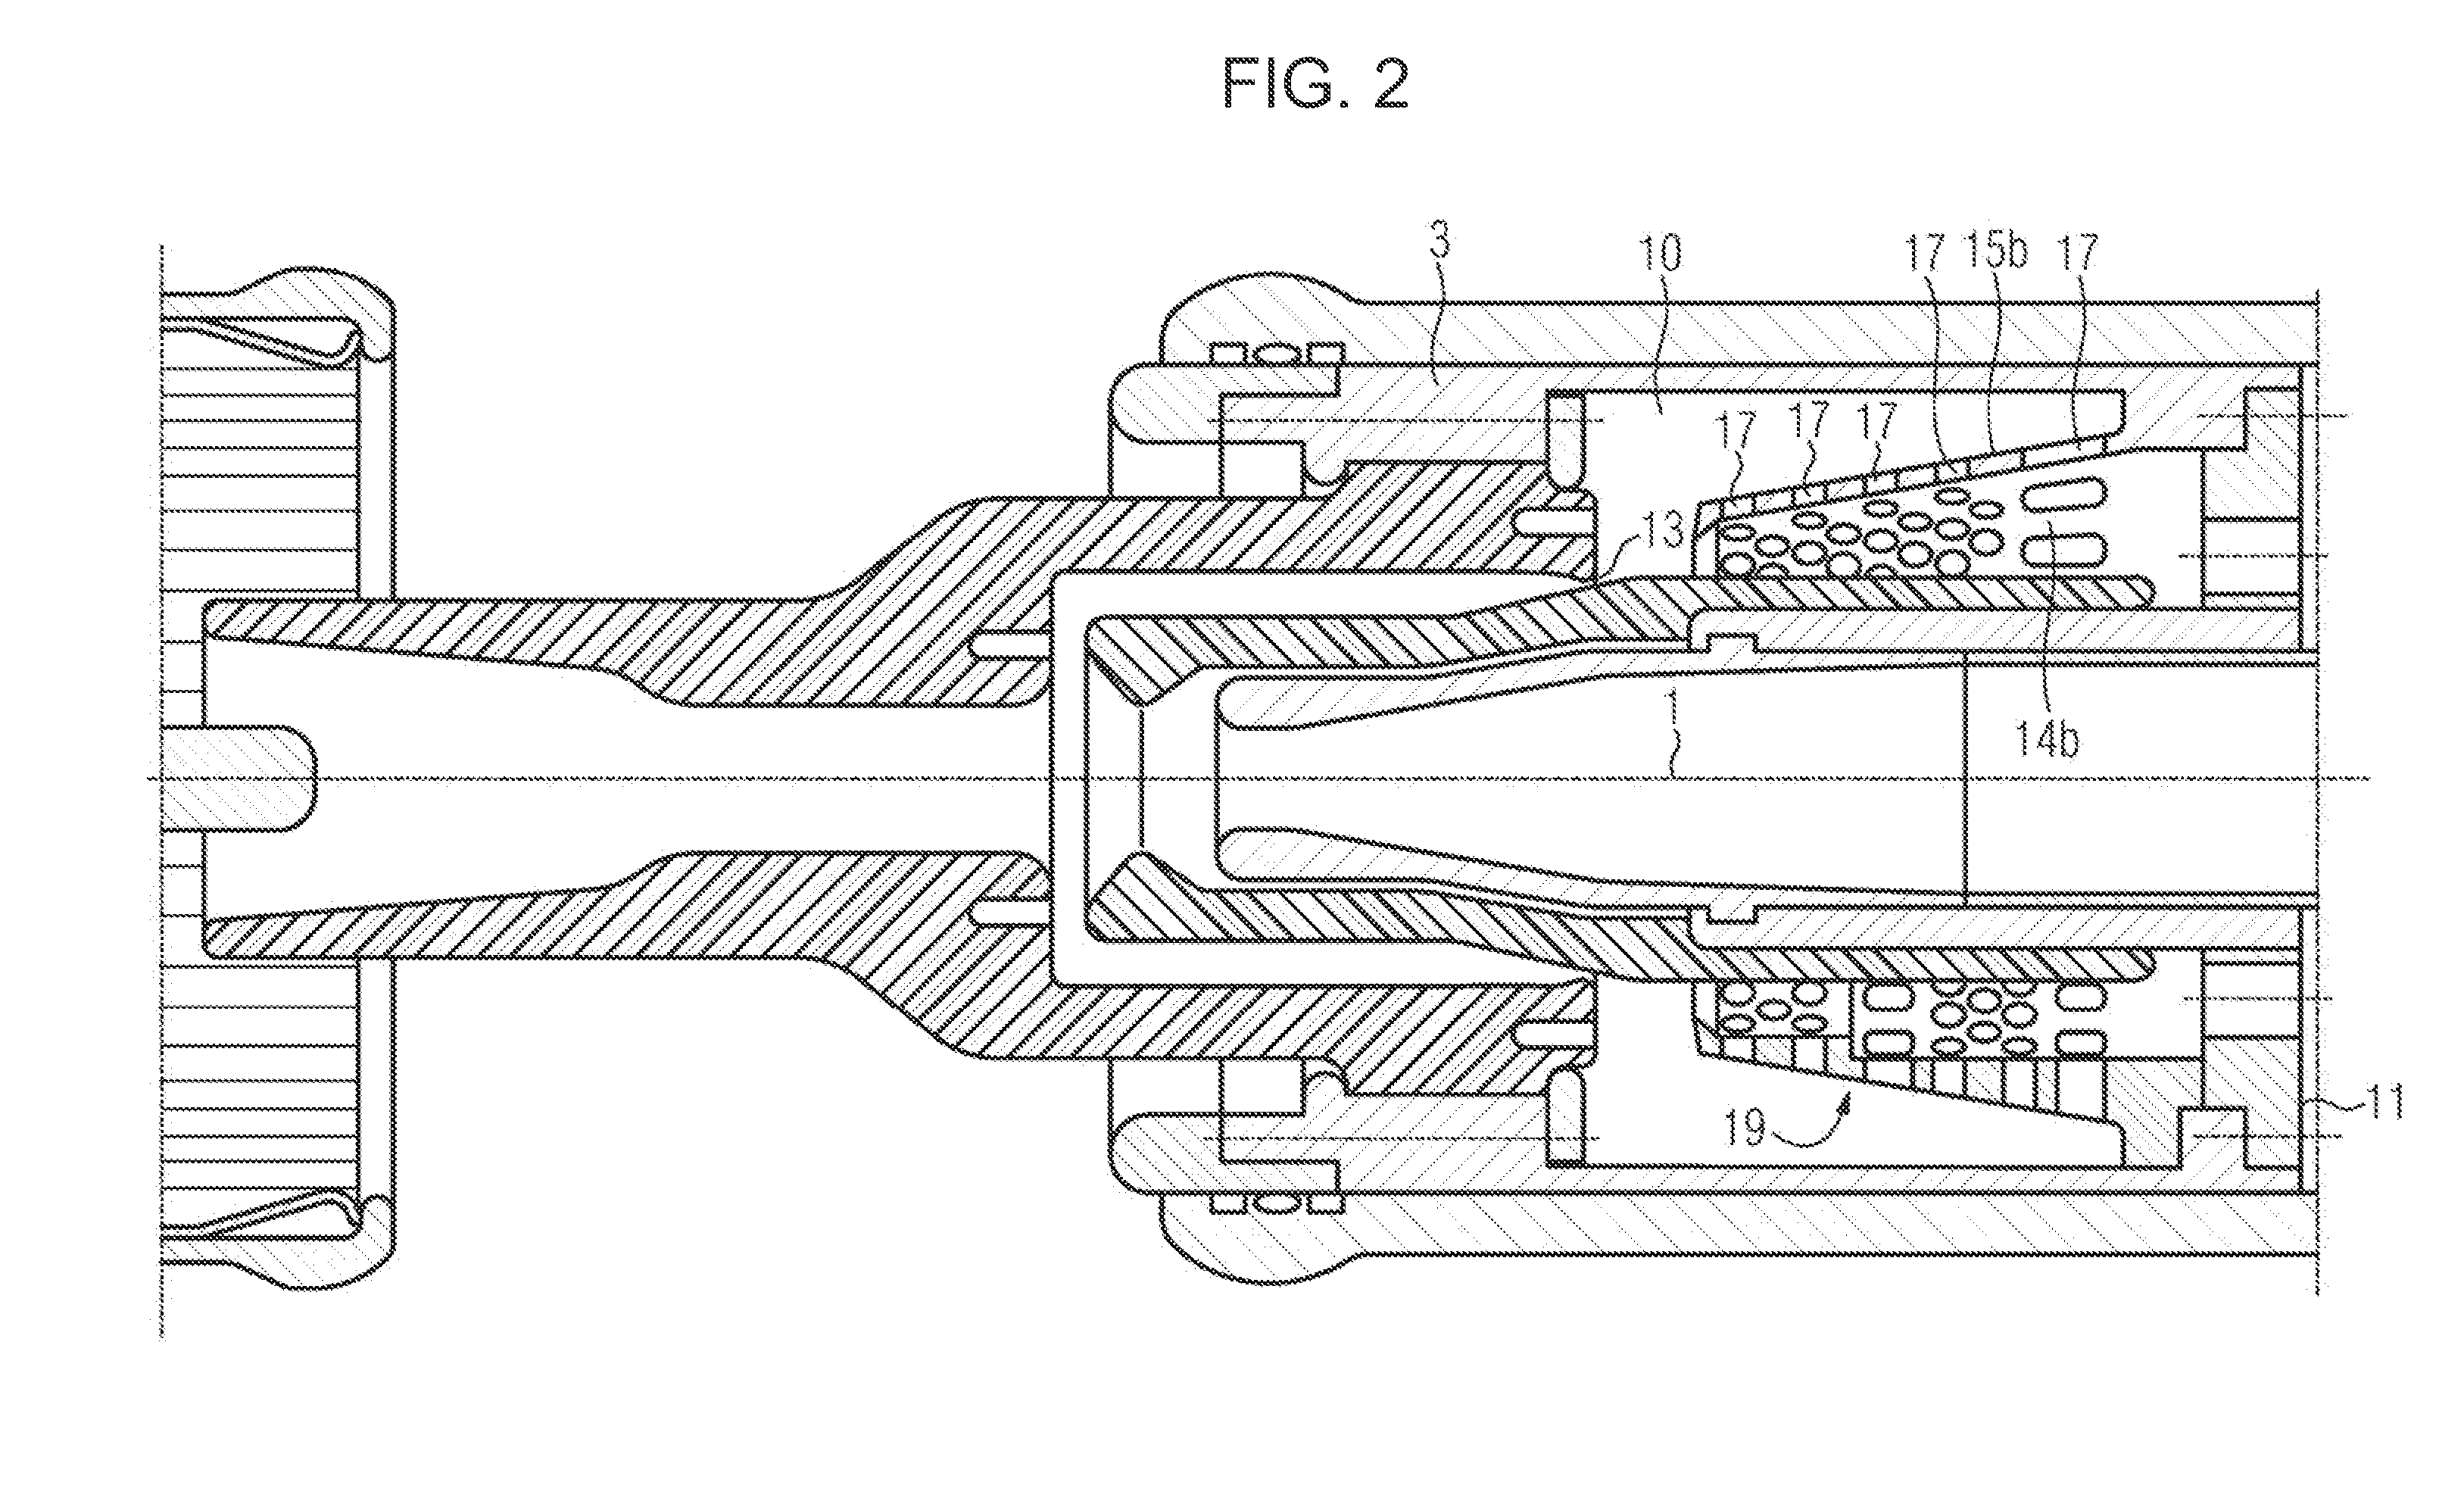 Switchgear assembly with a contact gap